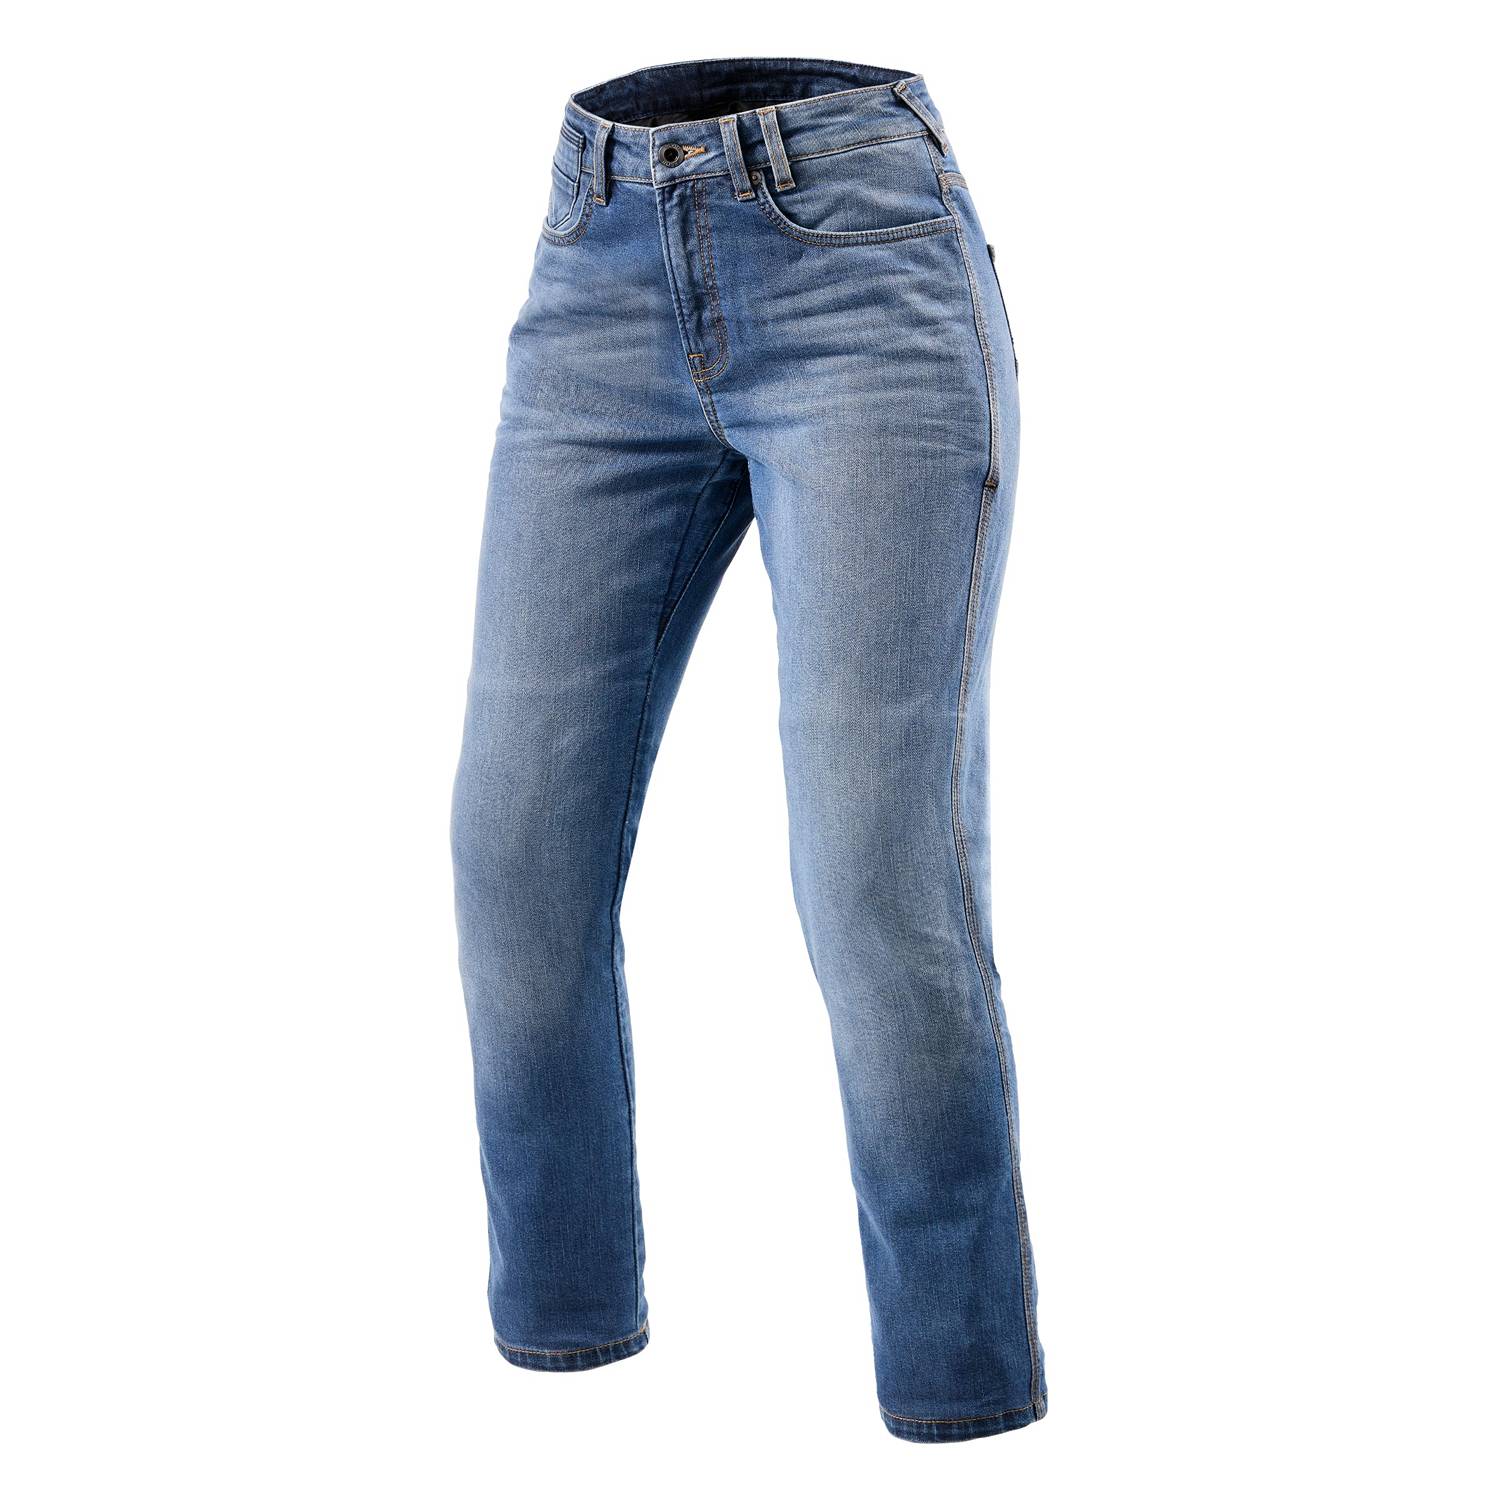 Image of EU REV'IT! Jeans Victoria 2 Ladies SF Classic Blue Used Motorcycle Jeans Taille L32/W28